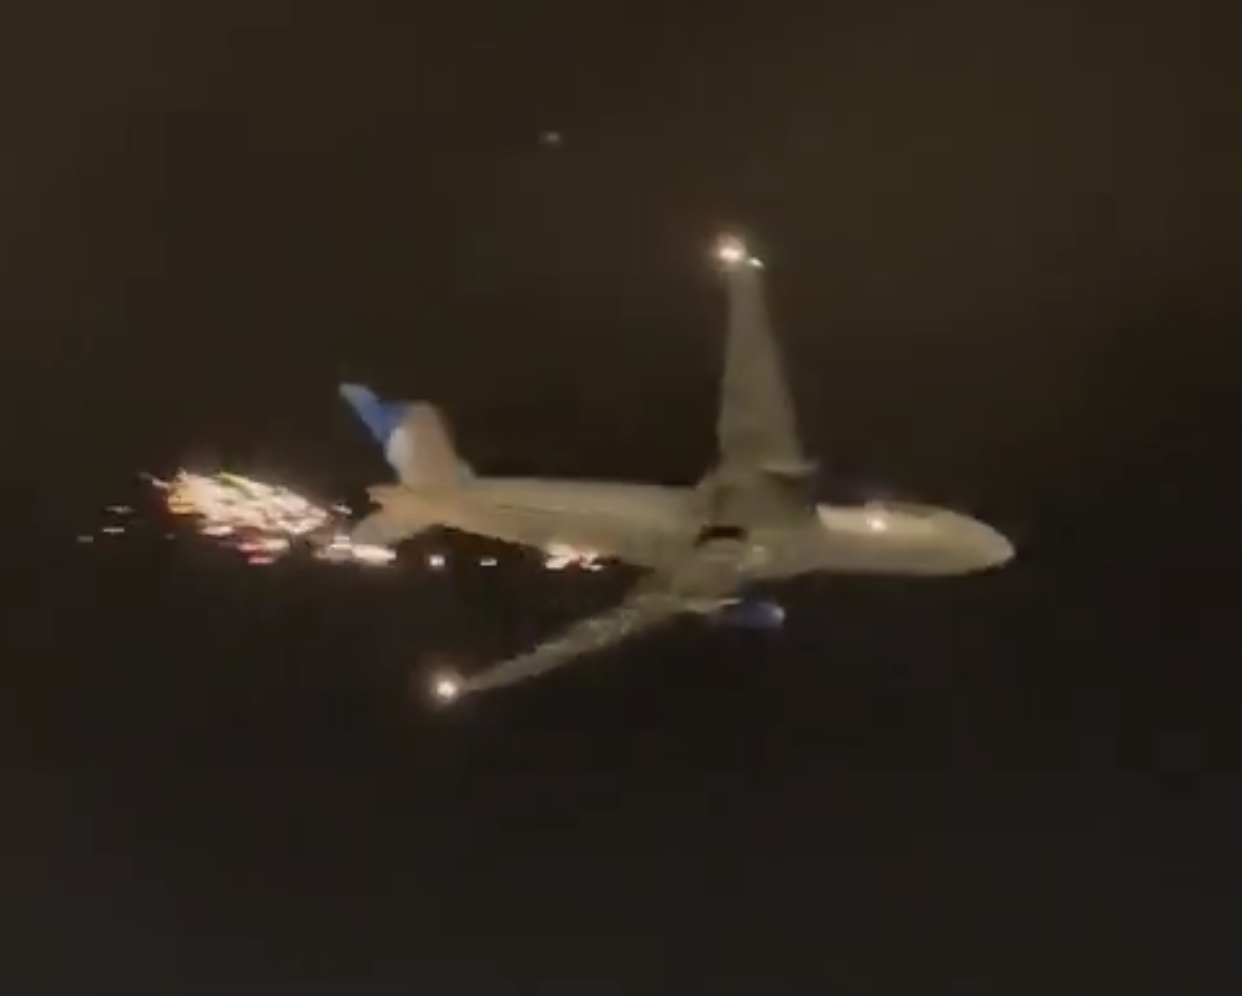 United Airlines Boeing 777 Returns After Sparks & Debris Fall + Ground 25 B777-200